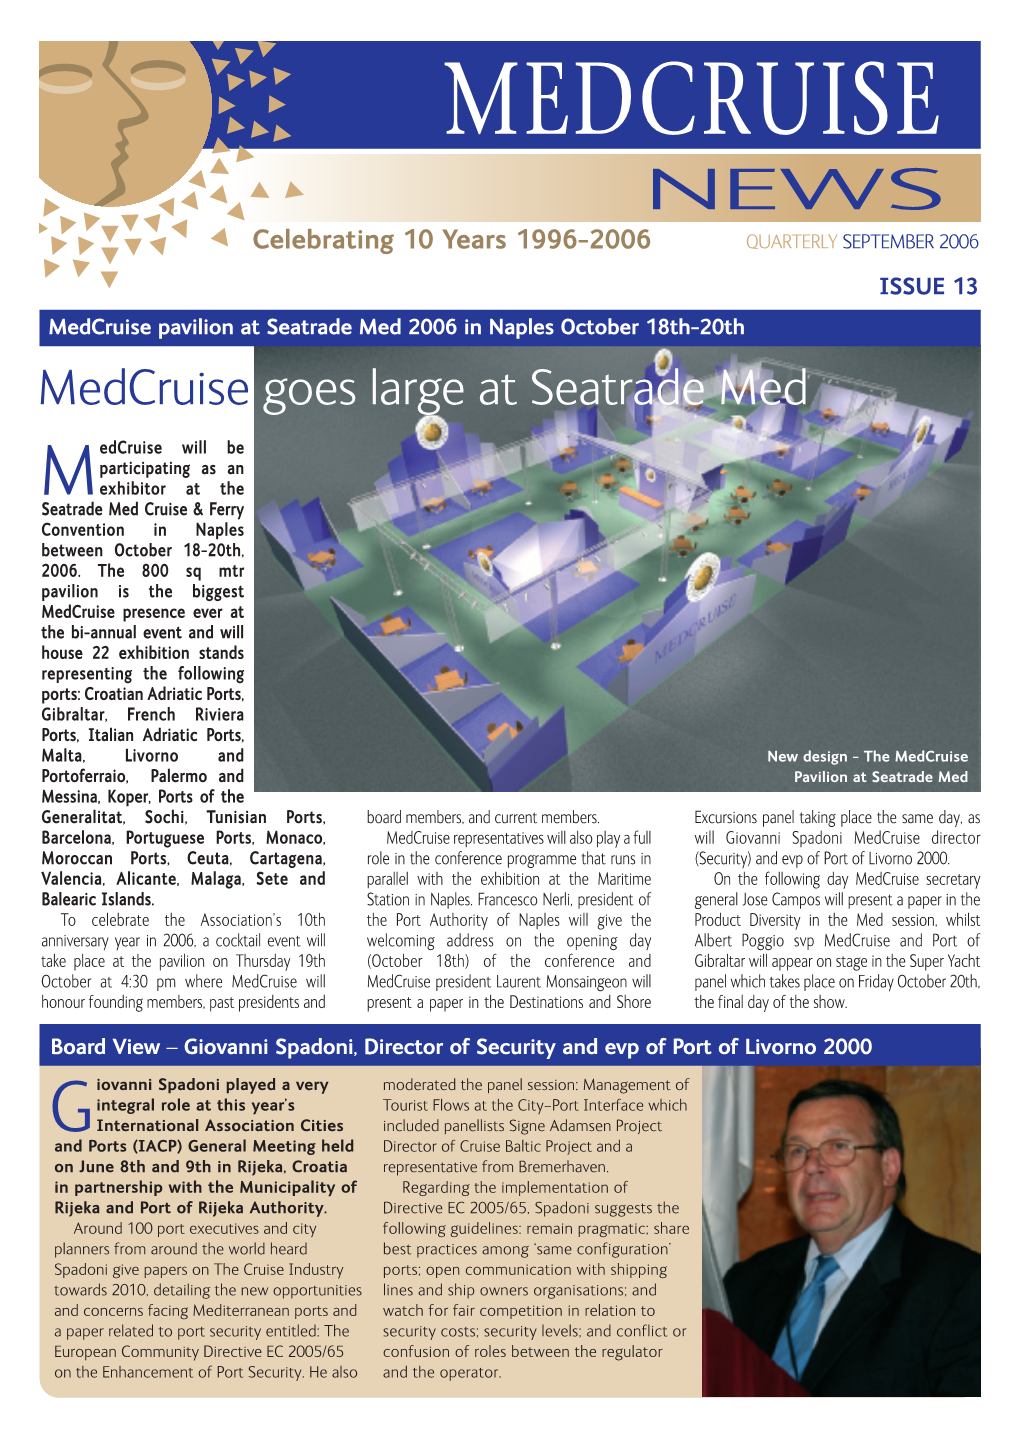 Medcruise News-13.Qxd:Medcruise News-6 21/2/08 11:25 Page 1